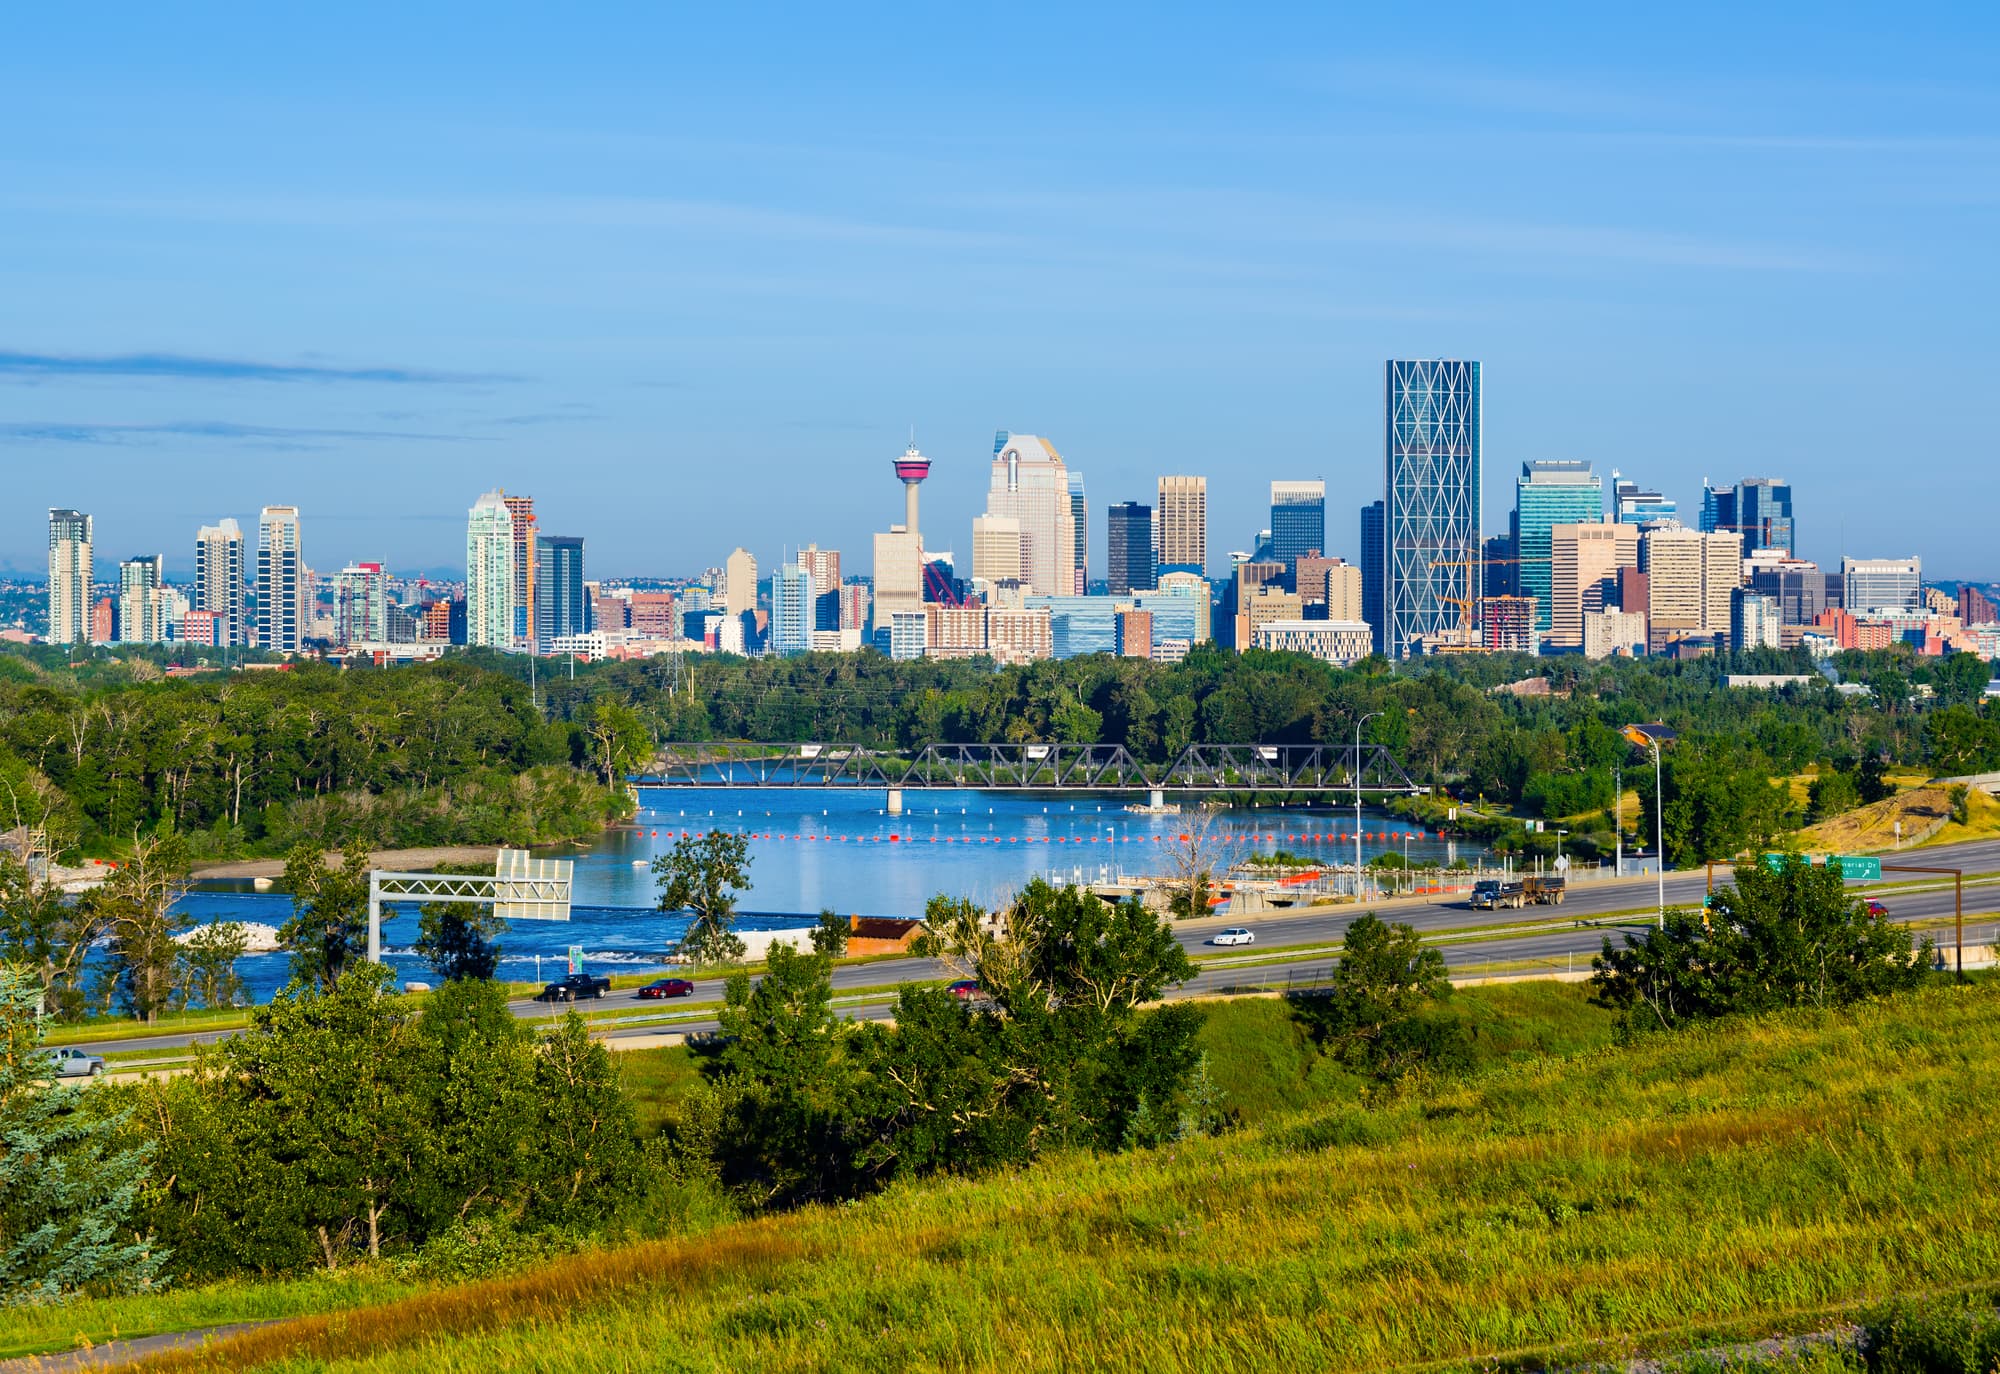 A landscape shot of the city of Calgary.